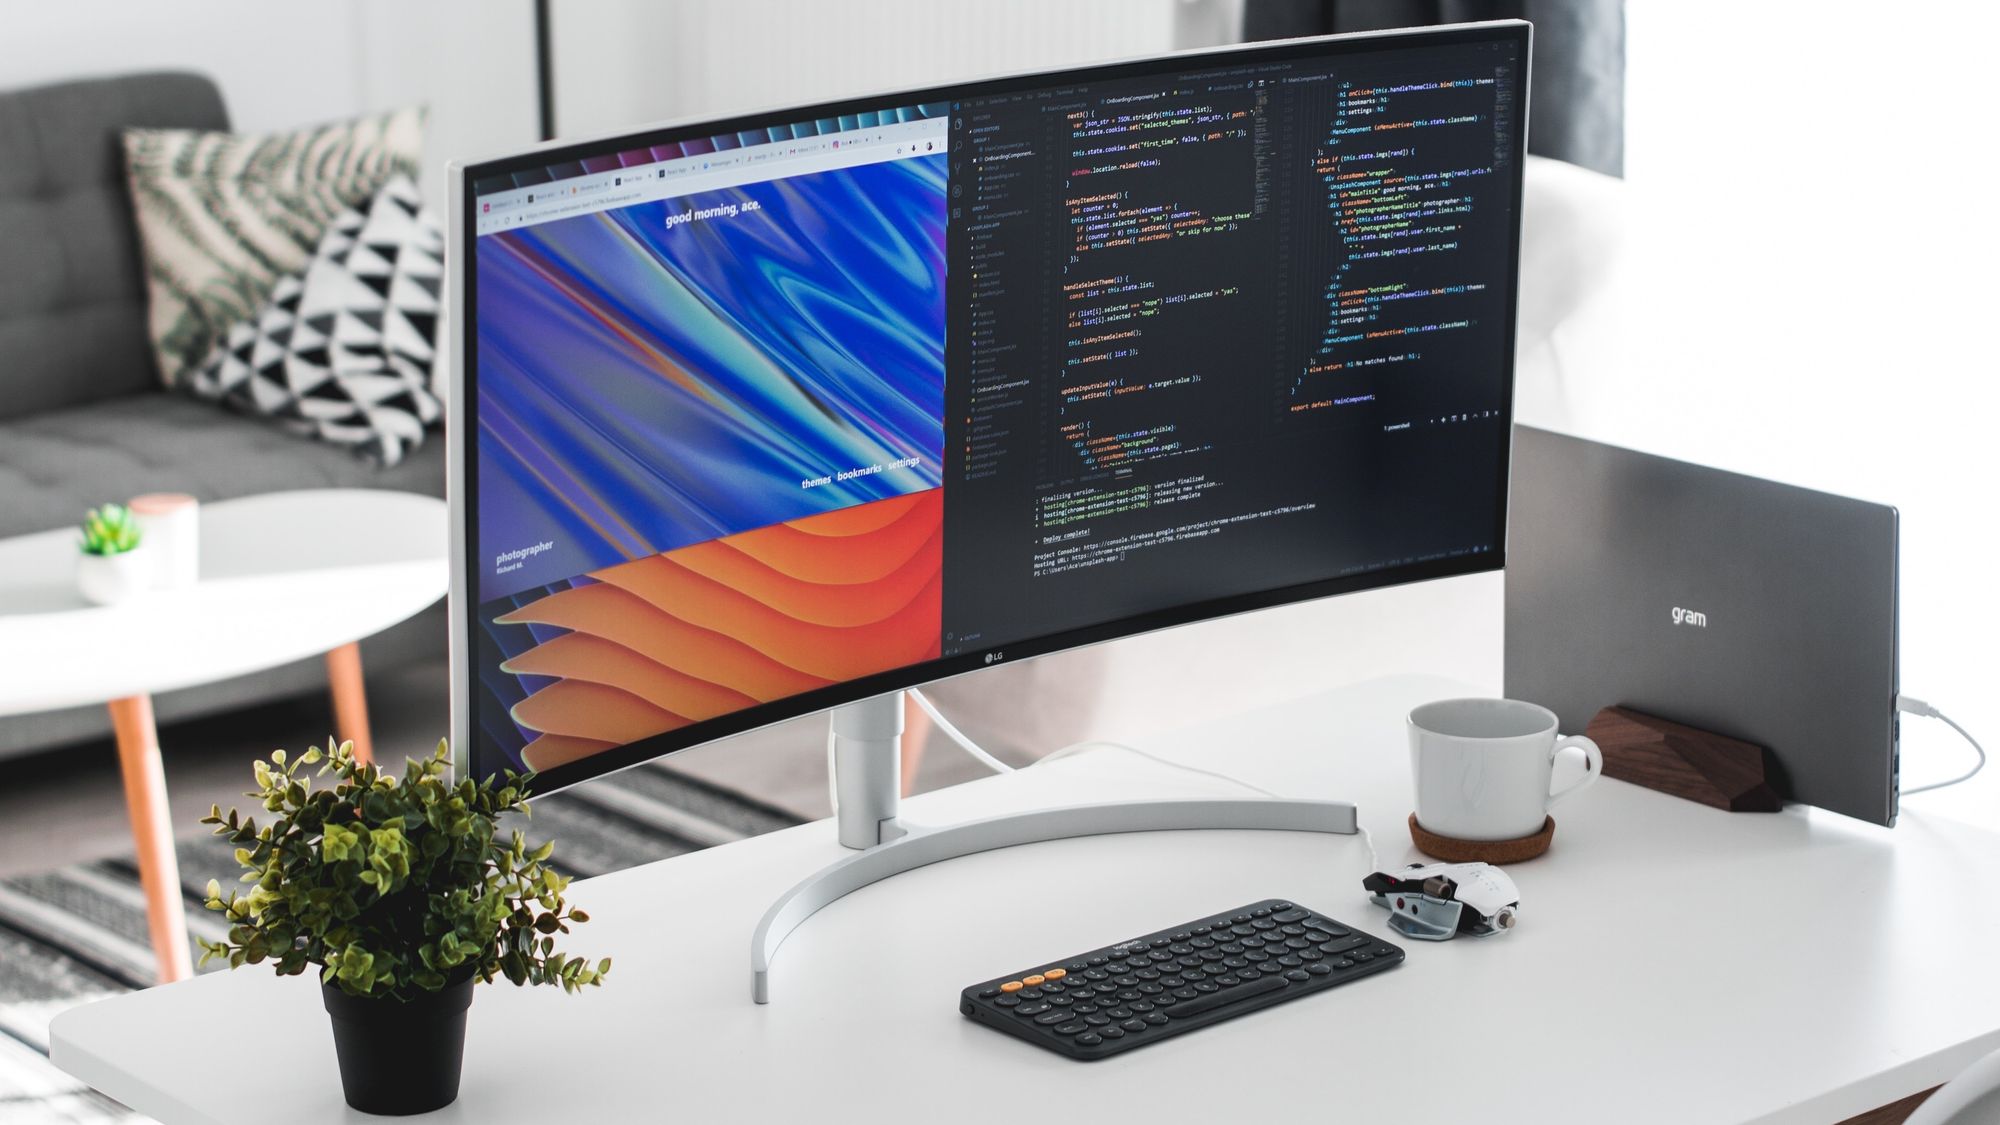 Web Development in 2020: What Coding Tools You Should Learn